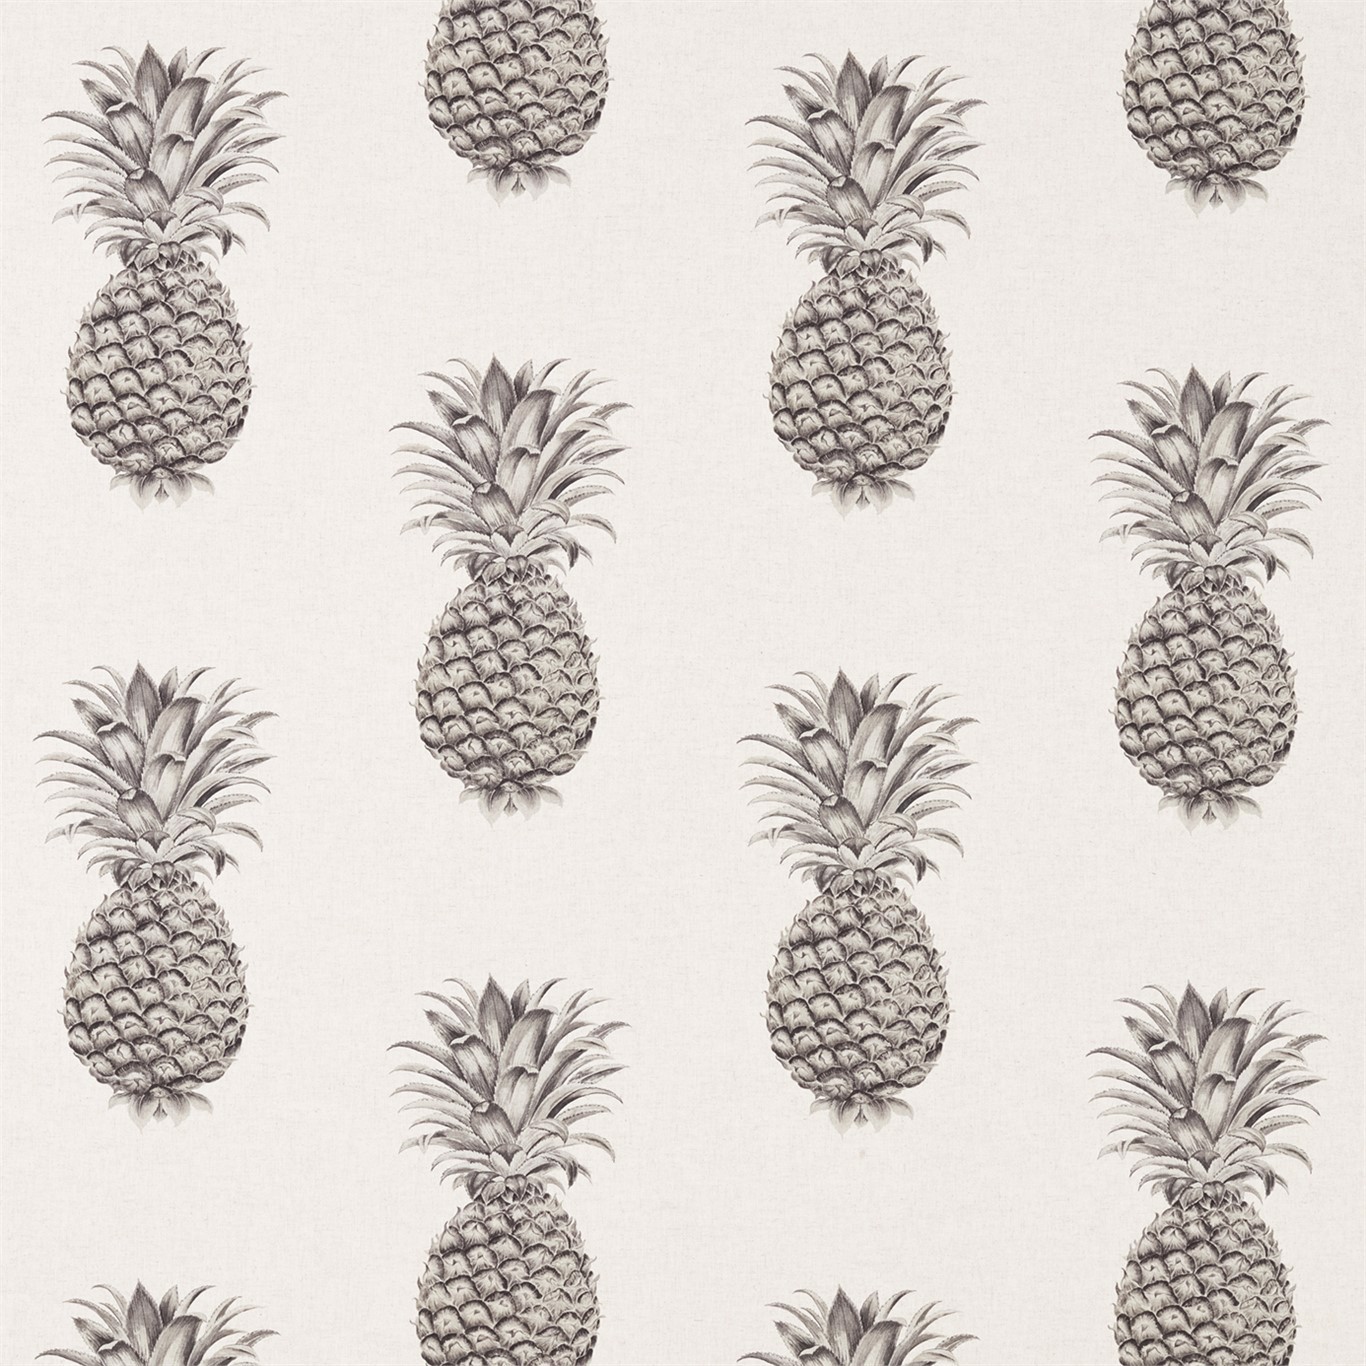 Pineapple Royale Graphite/Linen Fabric by SAN